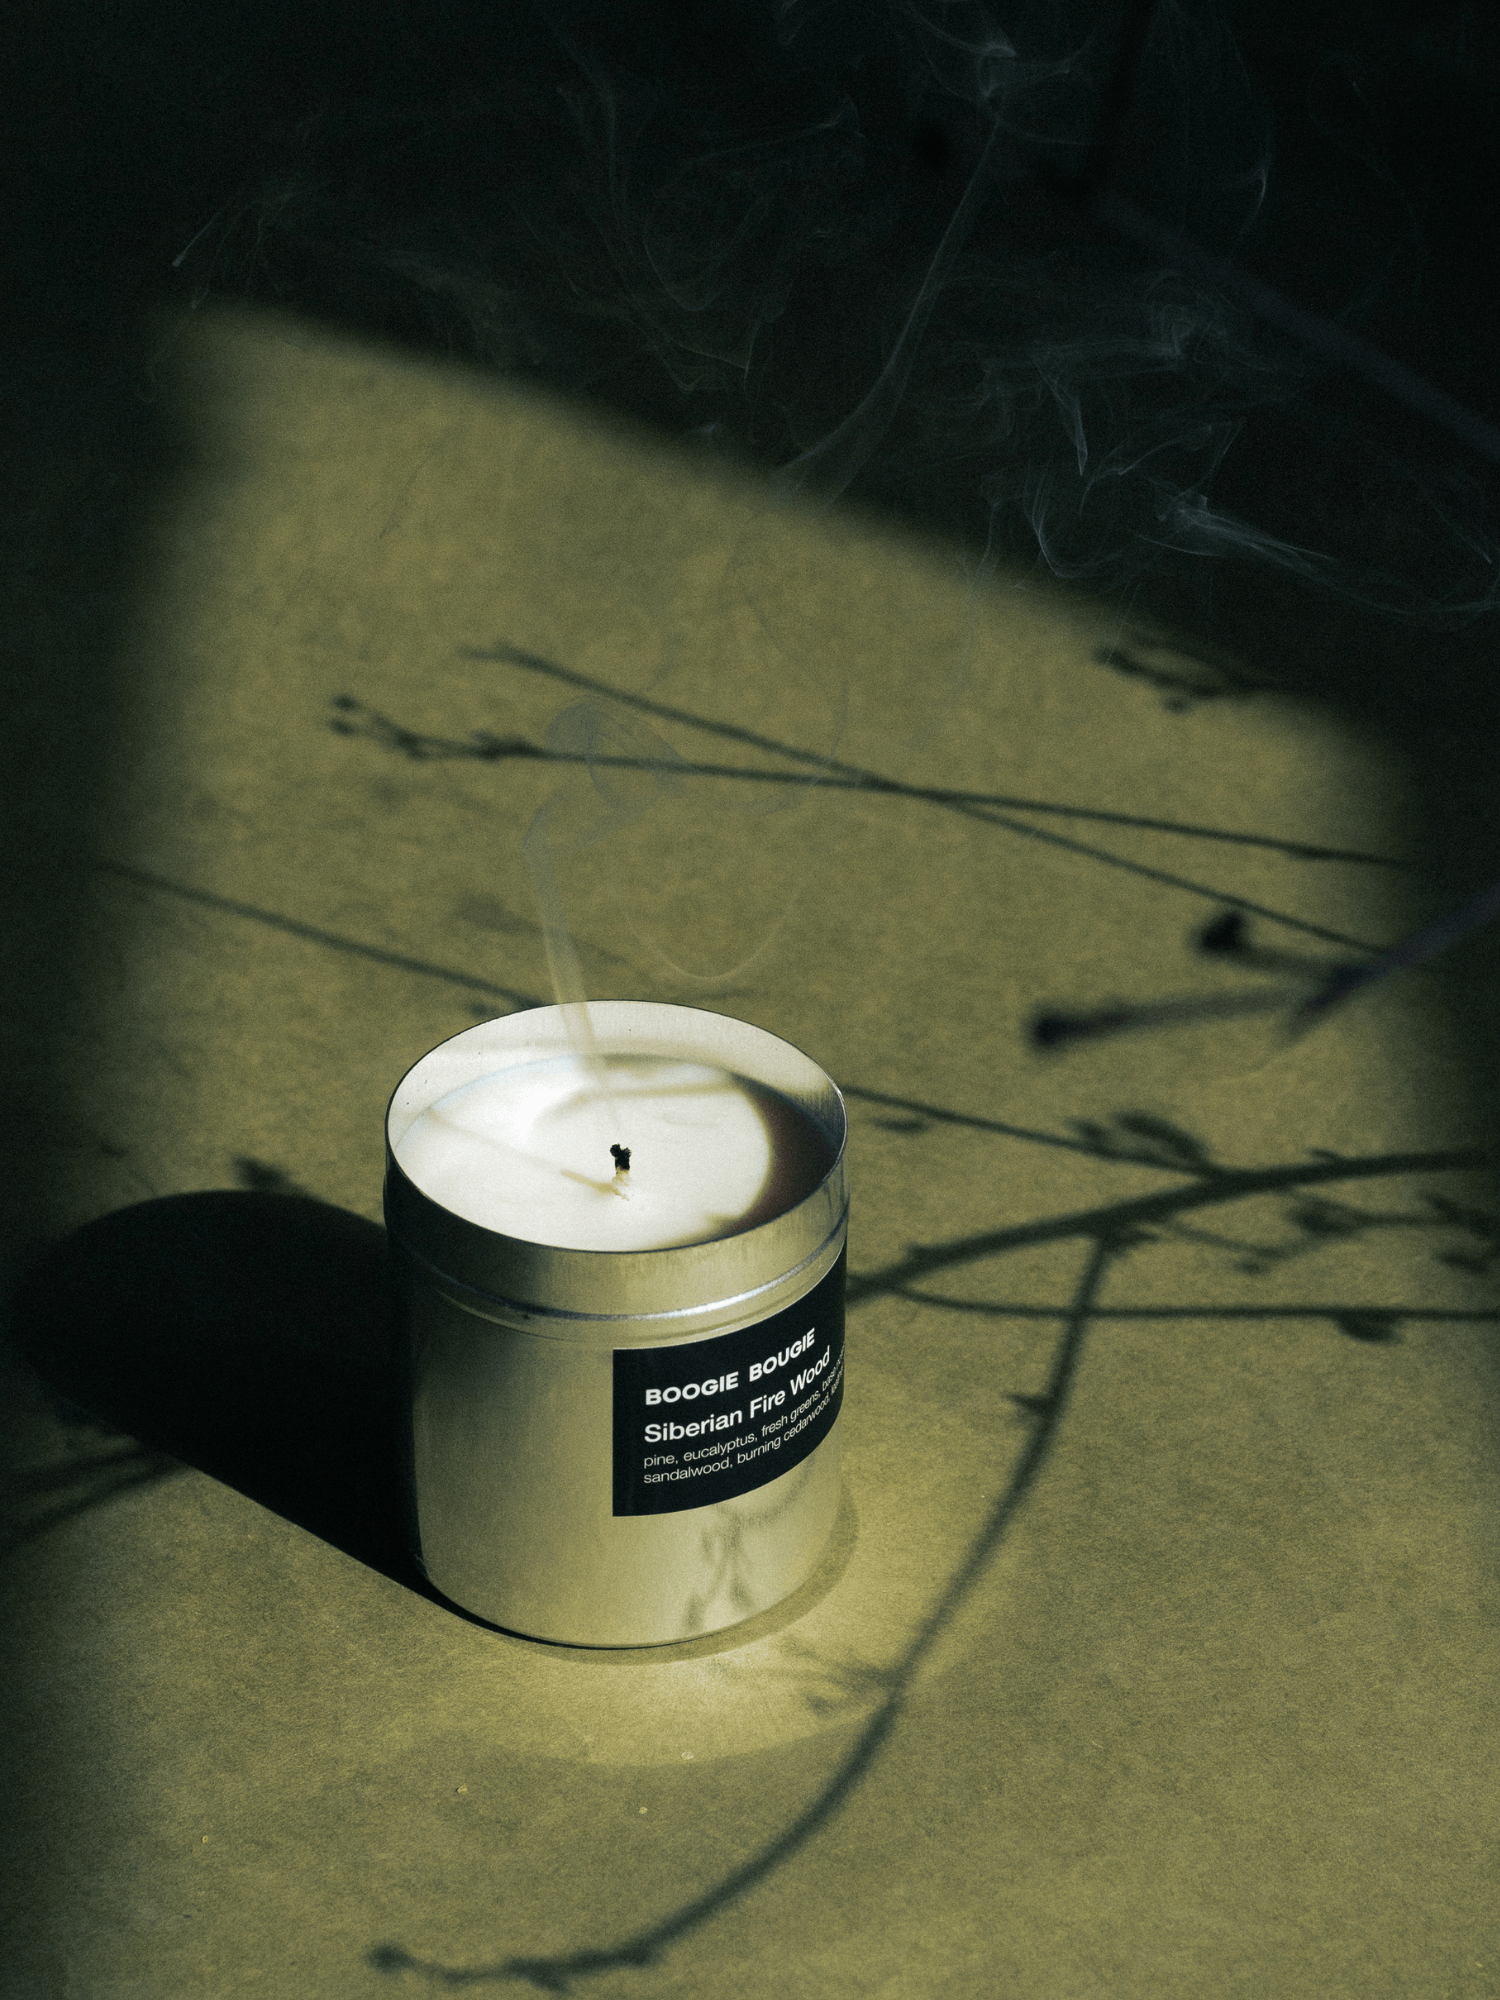 Siberian Fire Wood- Scented Candle | Boogie Bougie